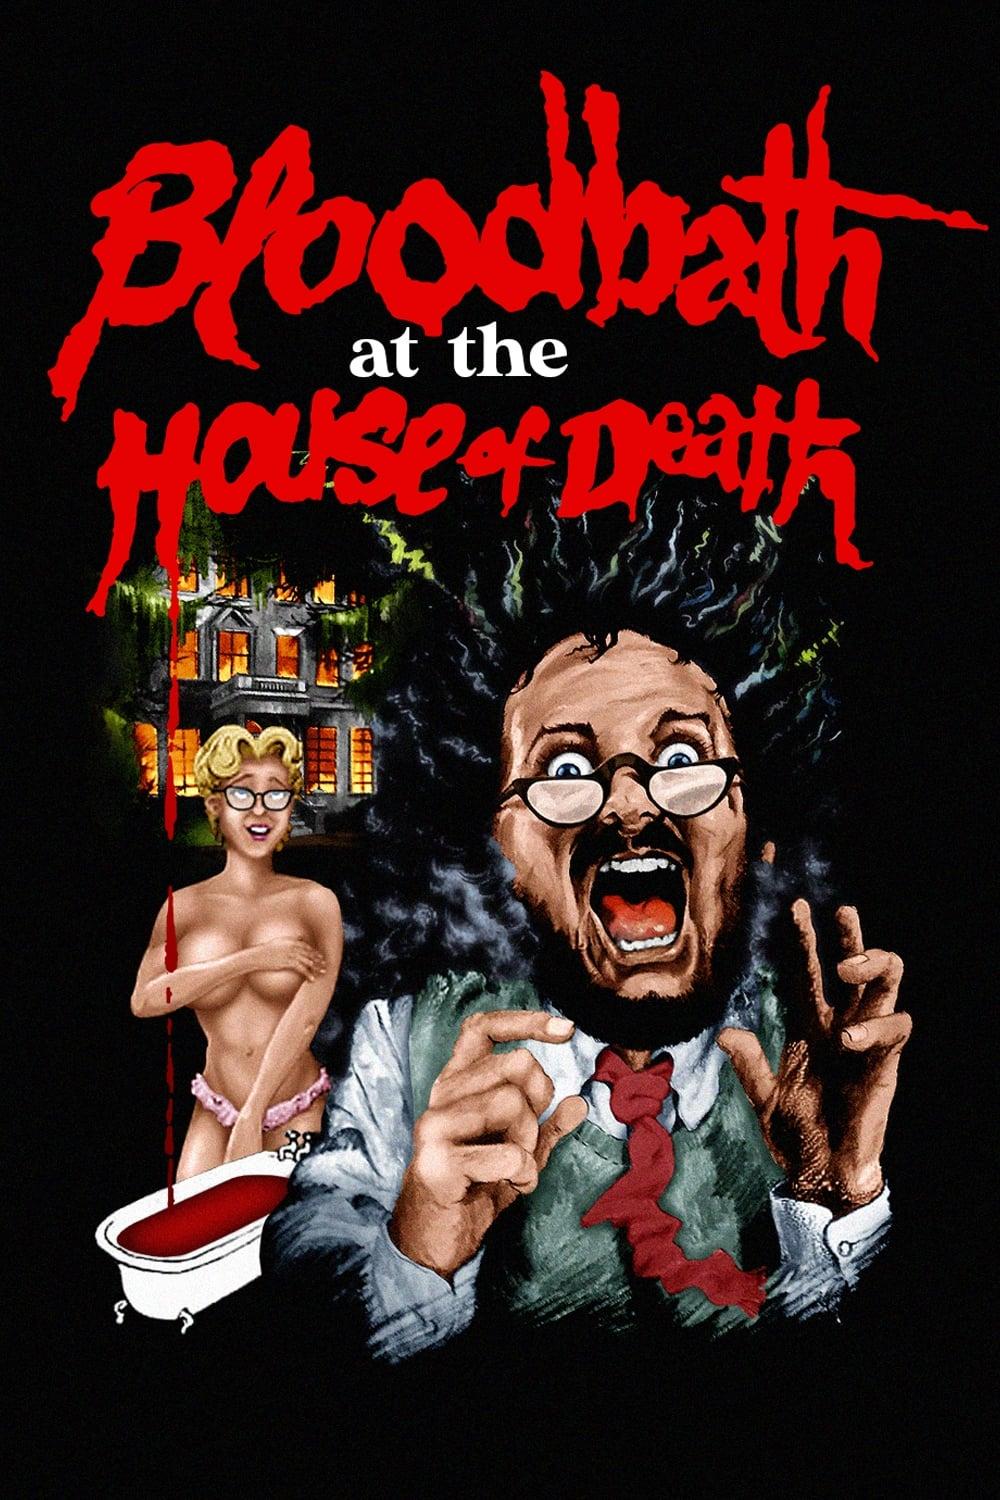 Bloodbath at the House of Death poster